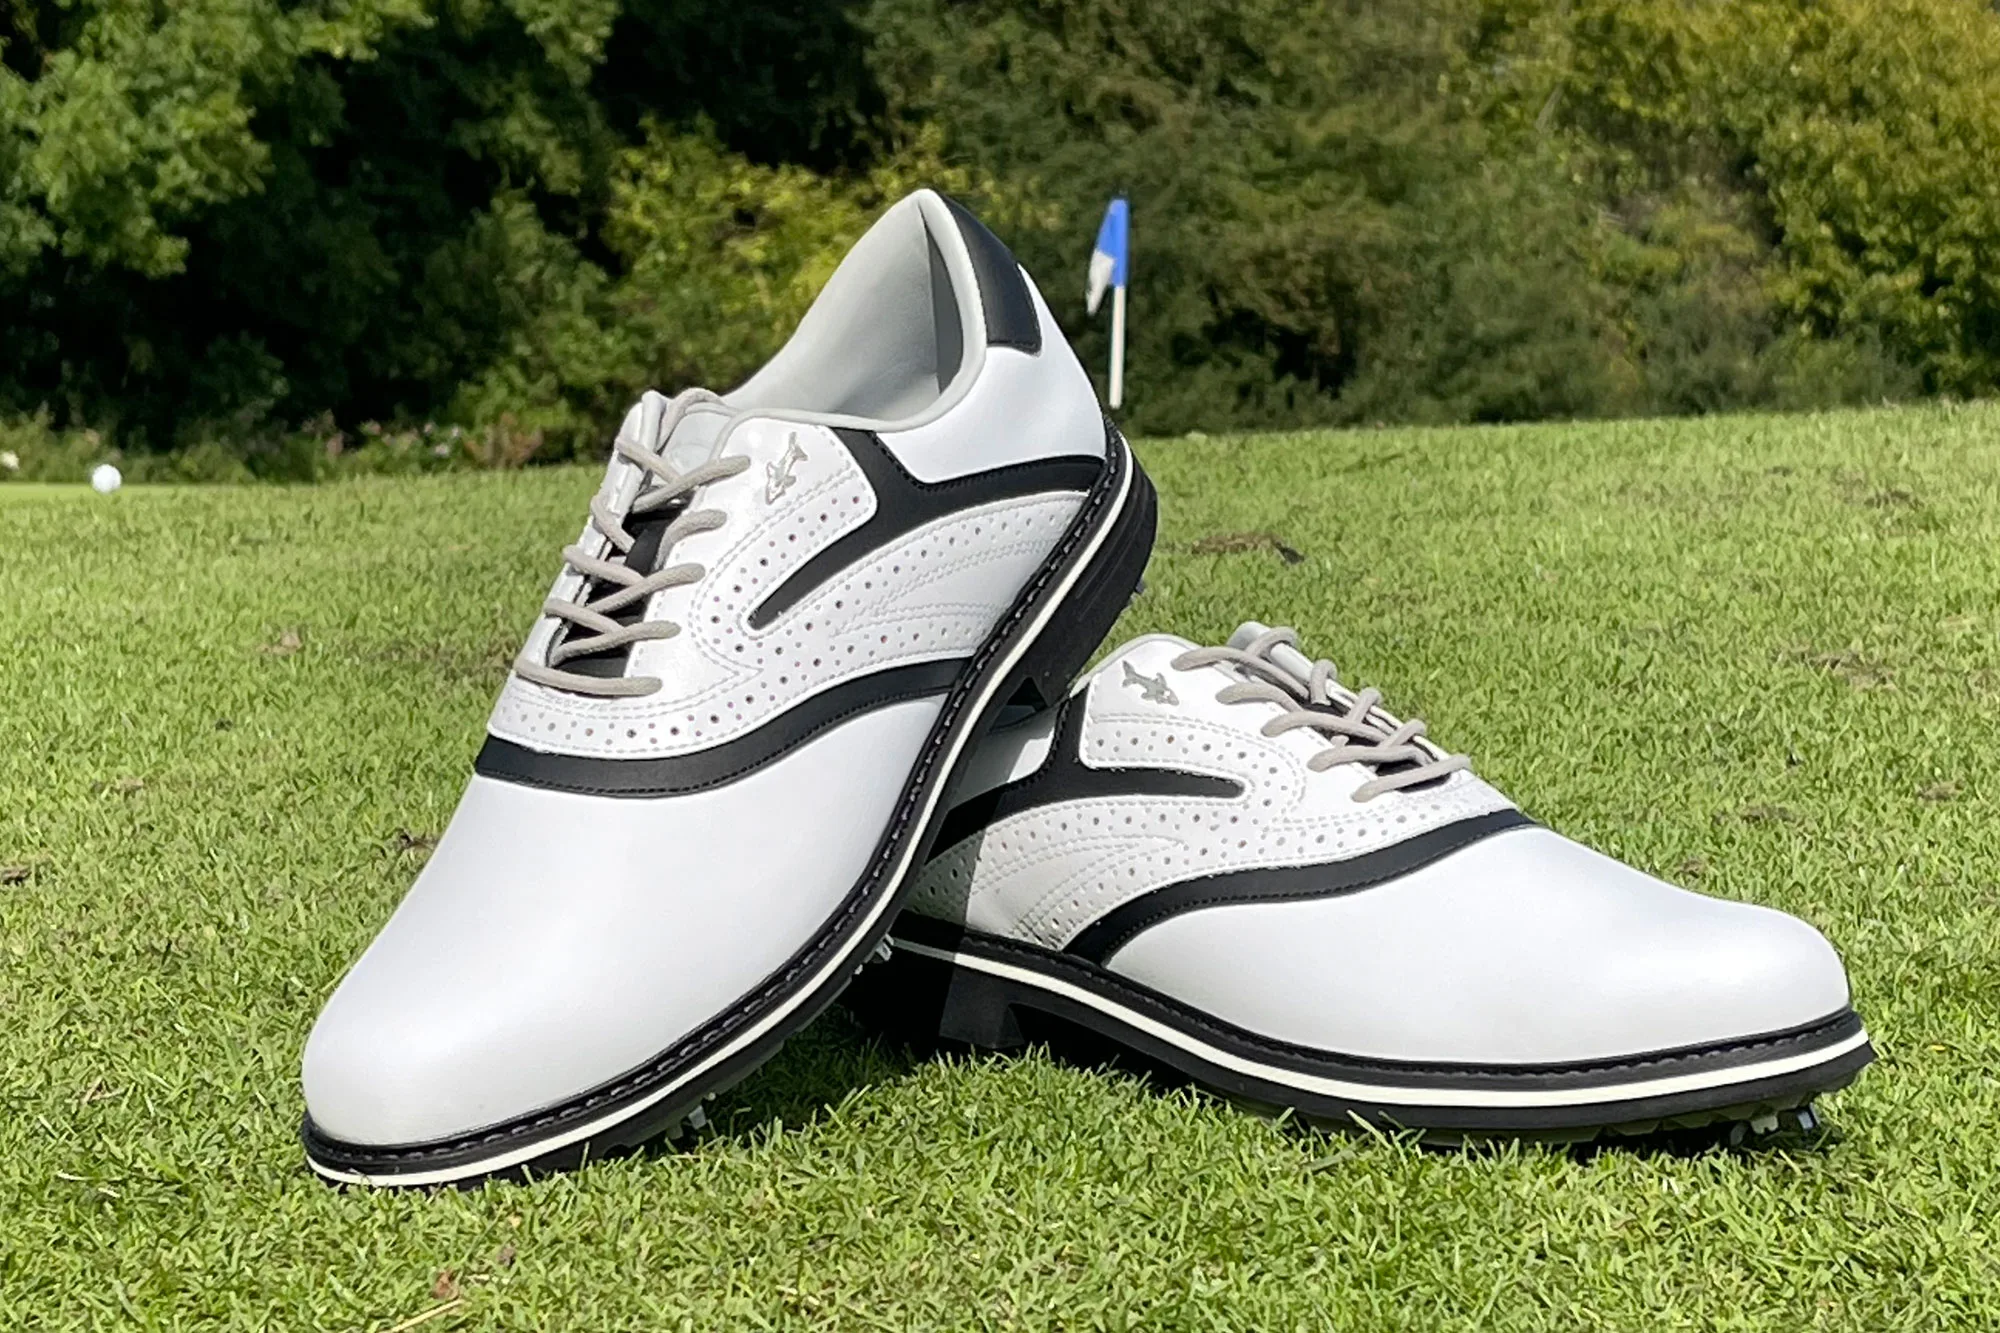 Greg Norman Men’s Isa Tour Waterproof Spiked Golf Shoes review